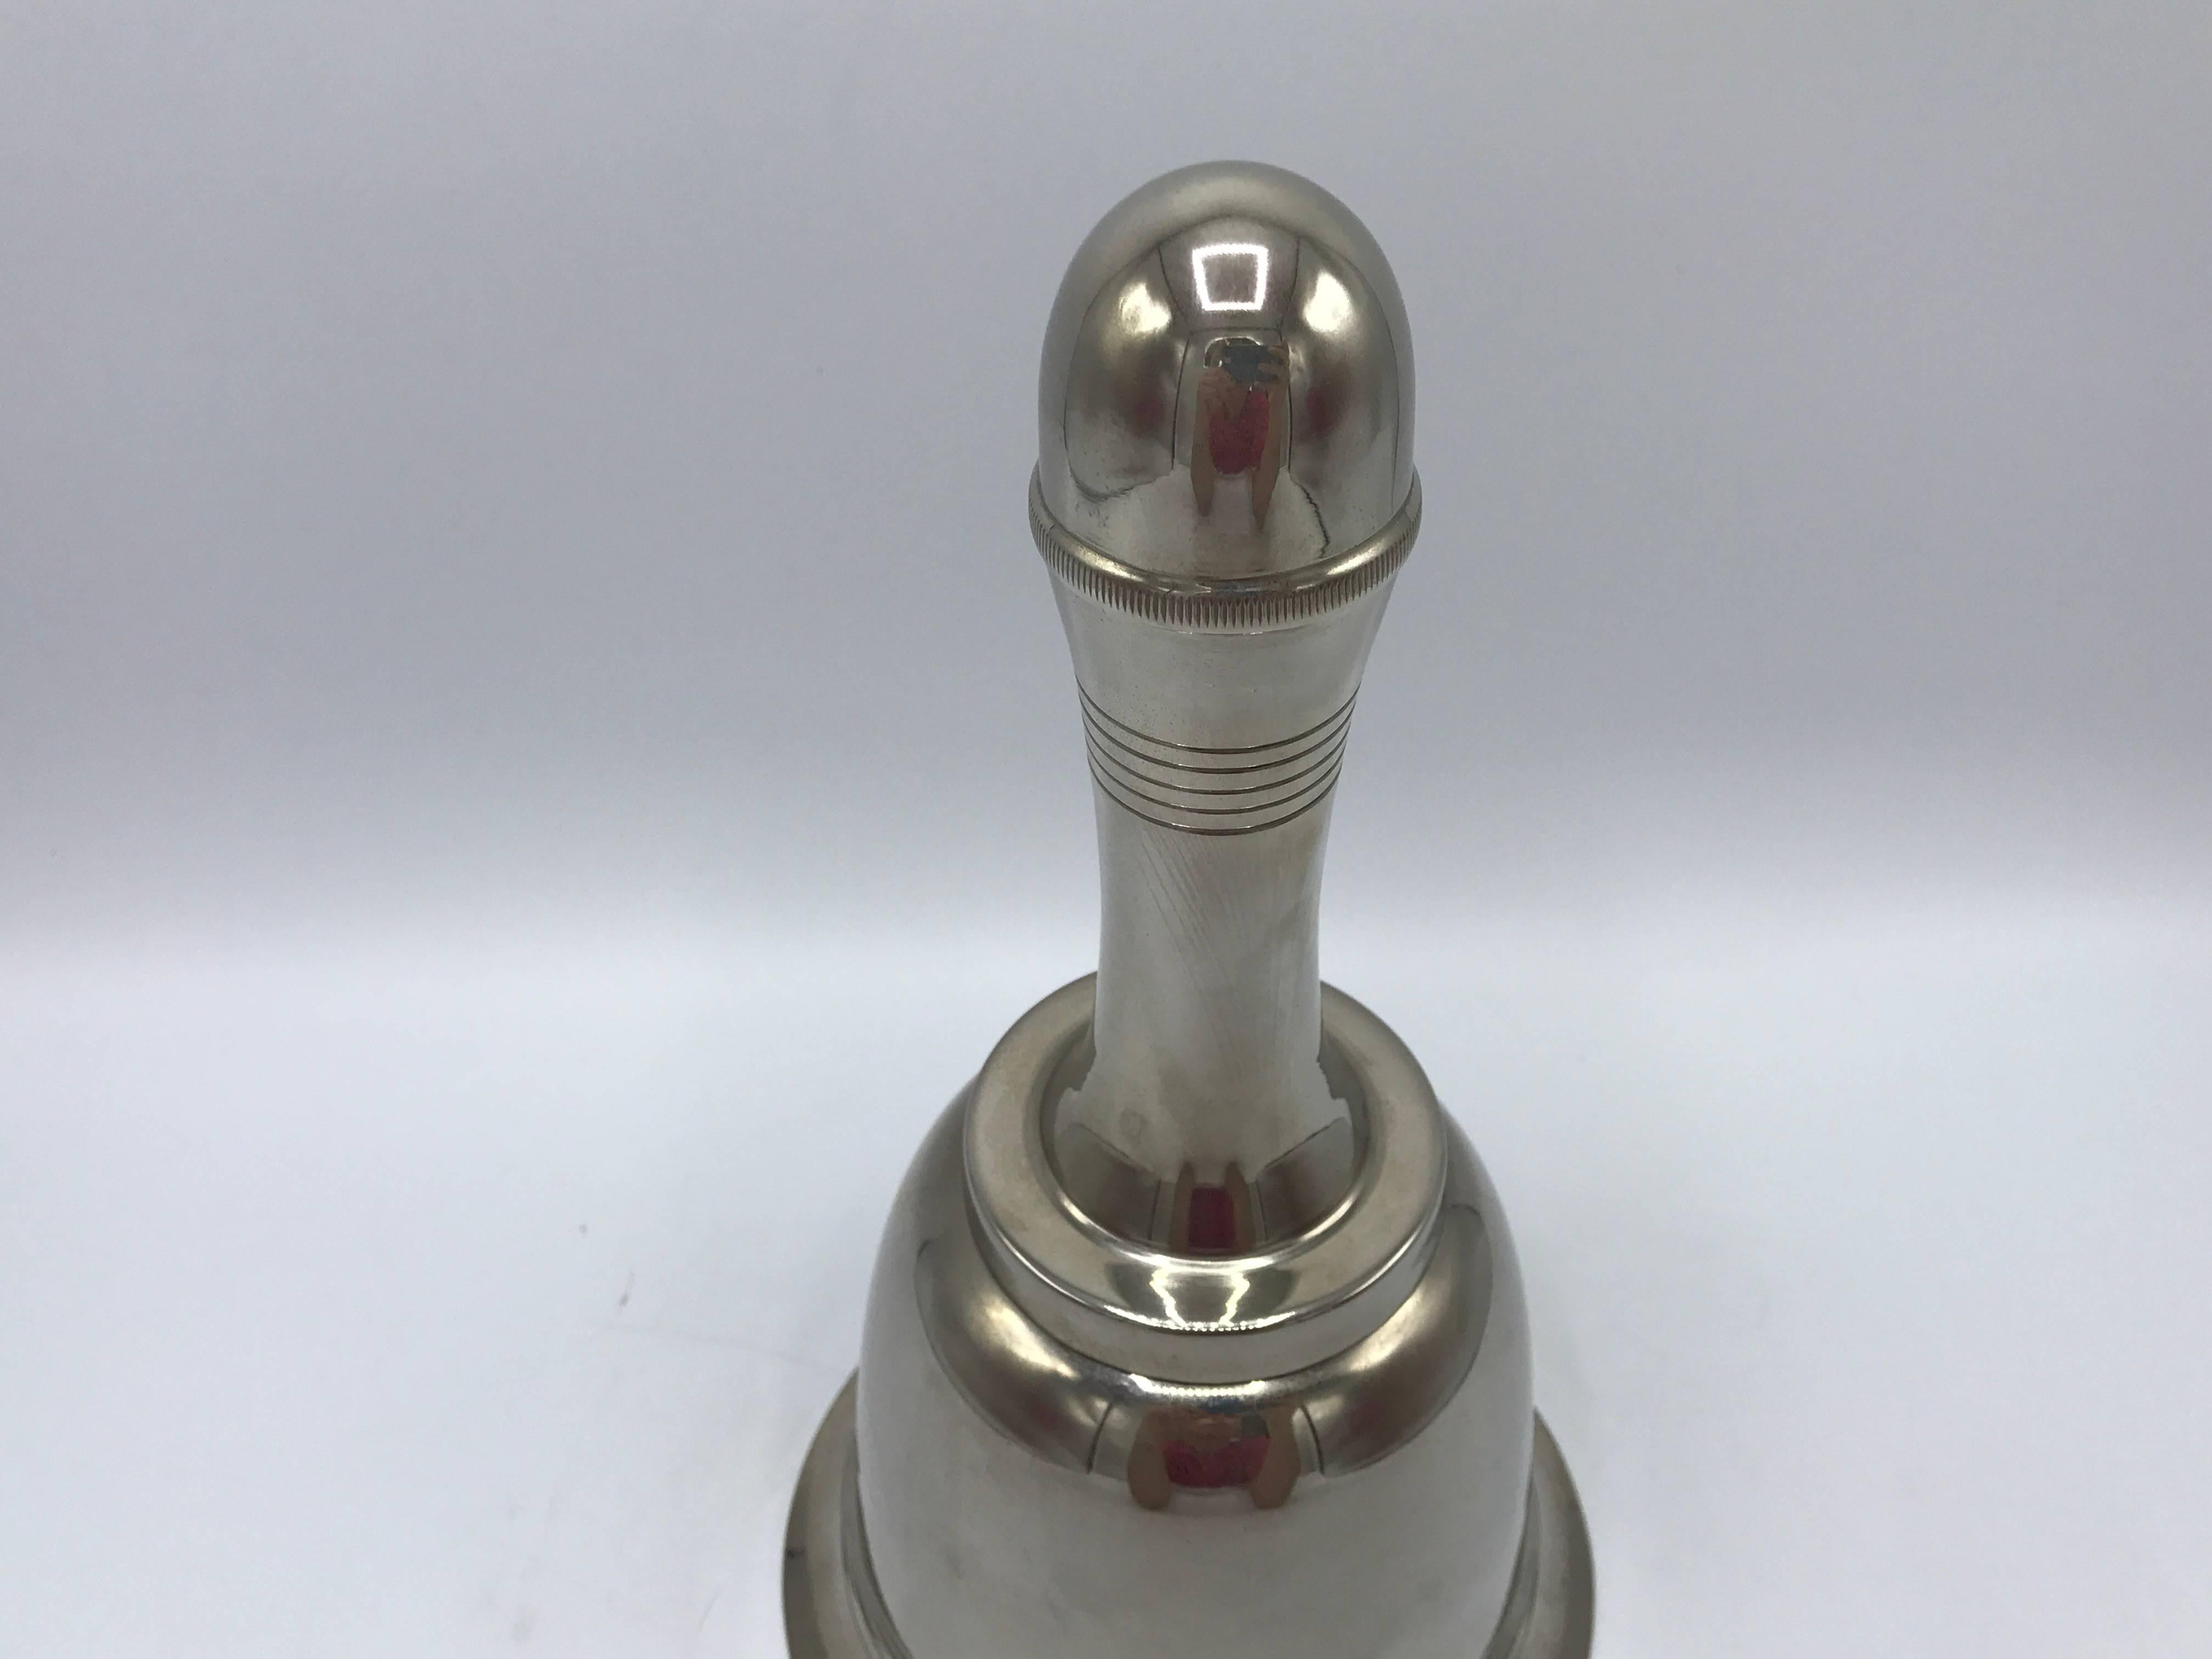 Offered is a gorgeous, 1930s reproduction Art Deco style silver bell decanter cocktail Shaker. Reproduced by Authentic Models, 2001 edition.